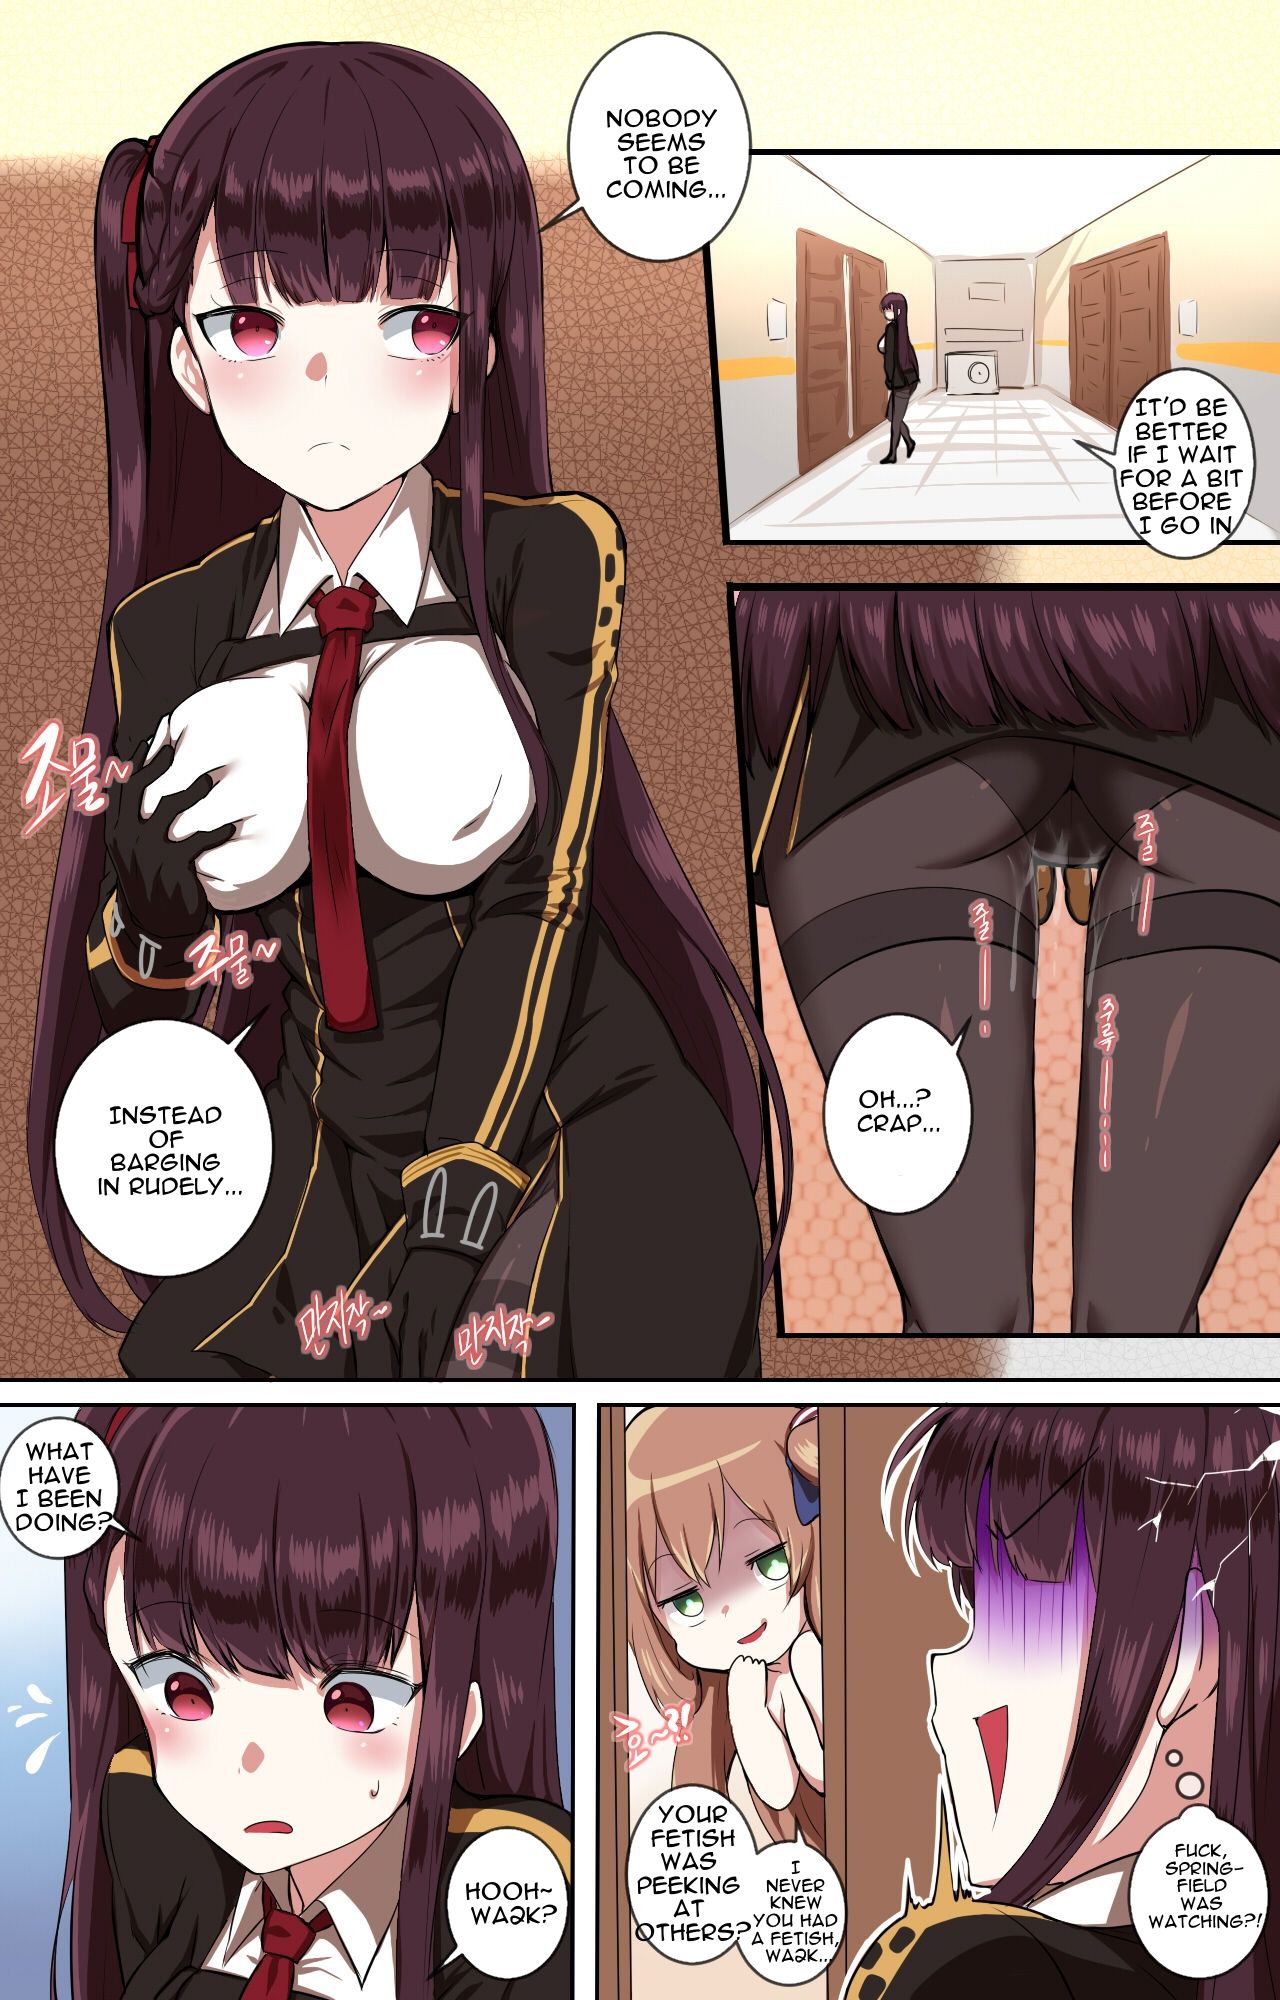 [yun-uyeon (ooyun)] How to use dolls 02 (Girls Frontline) [English] page 4 full